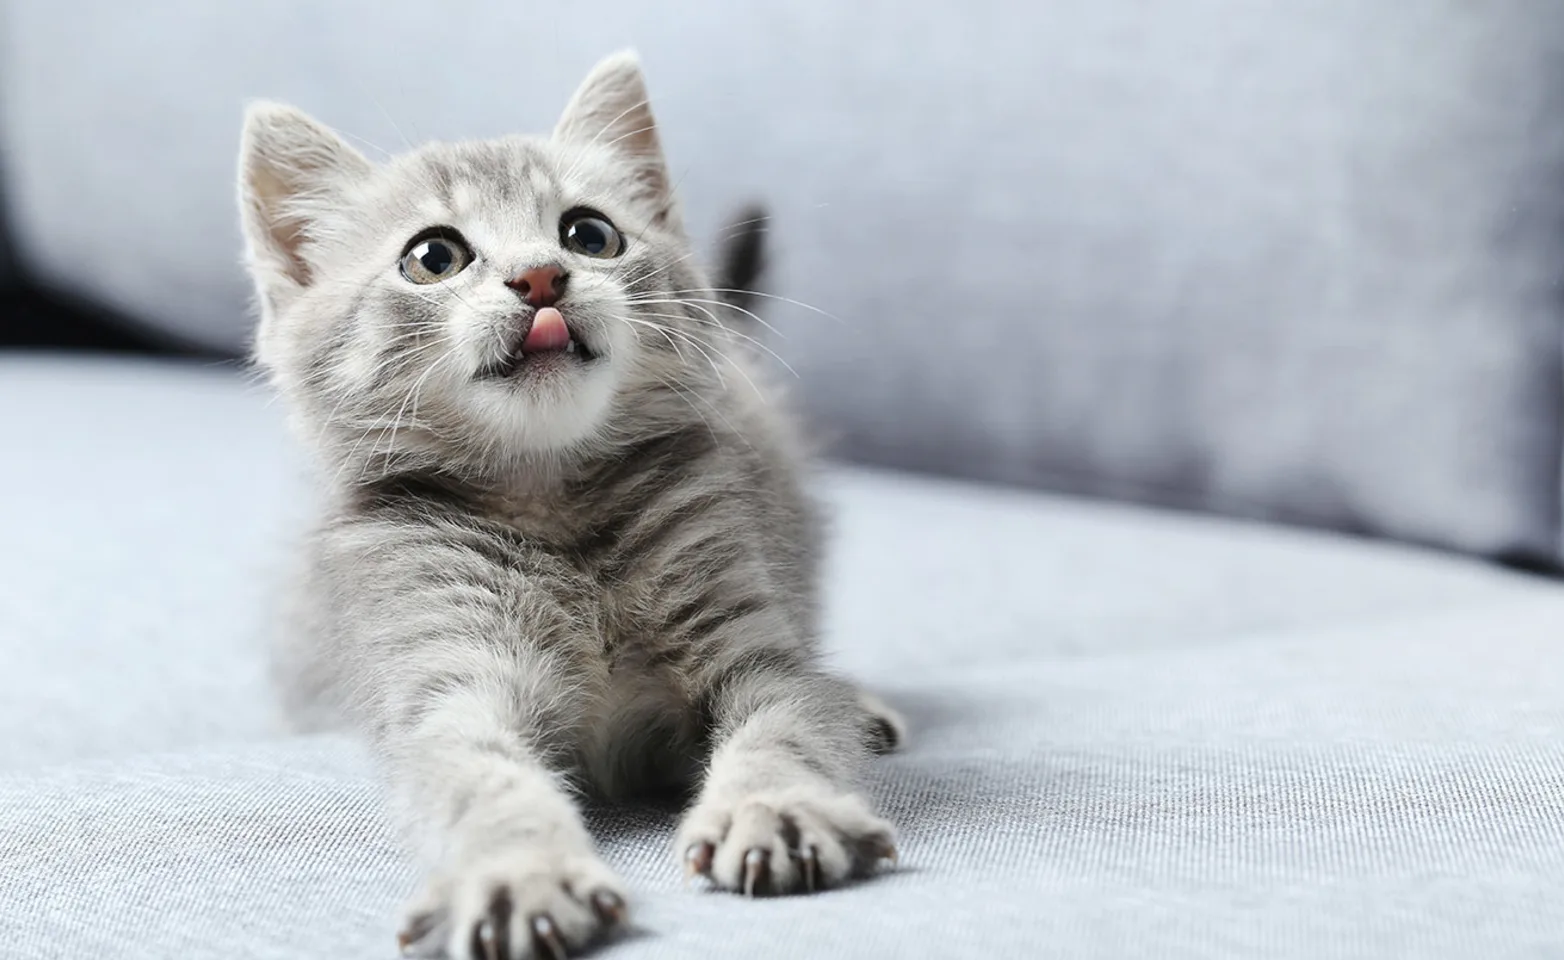 Kitten with tongue out on couch